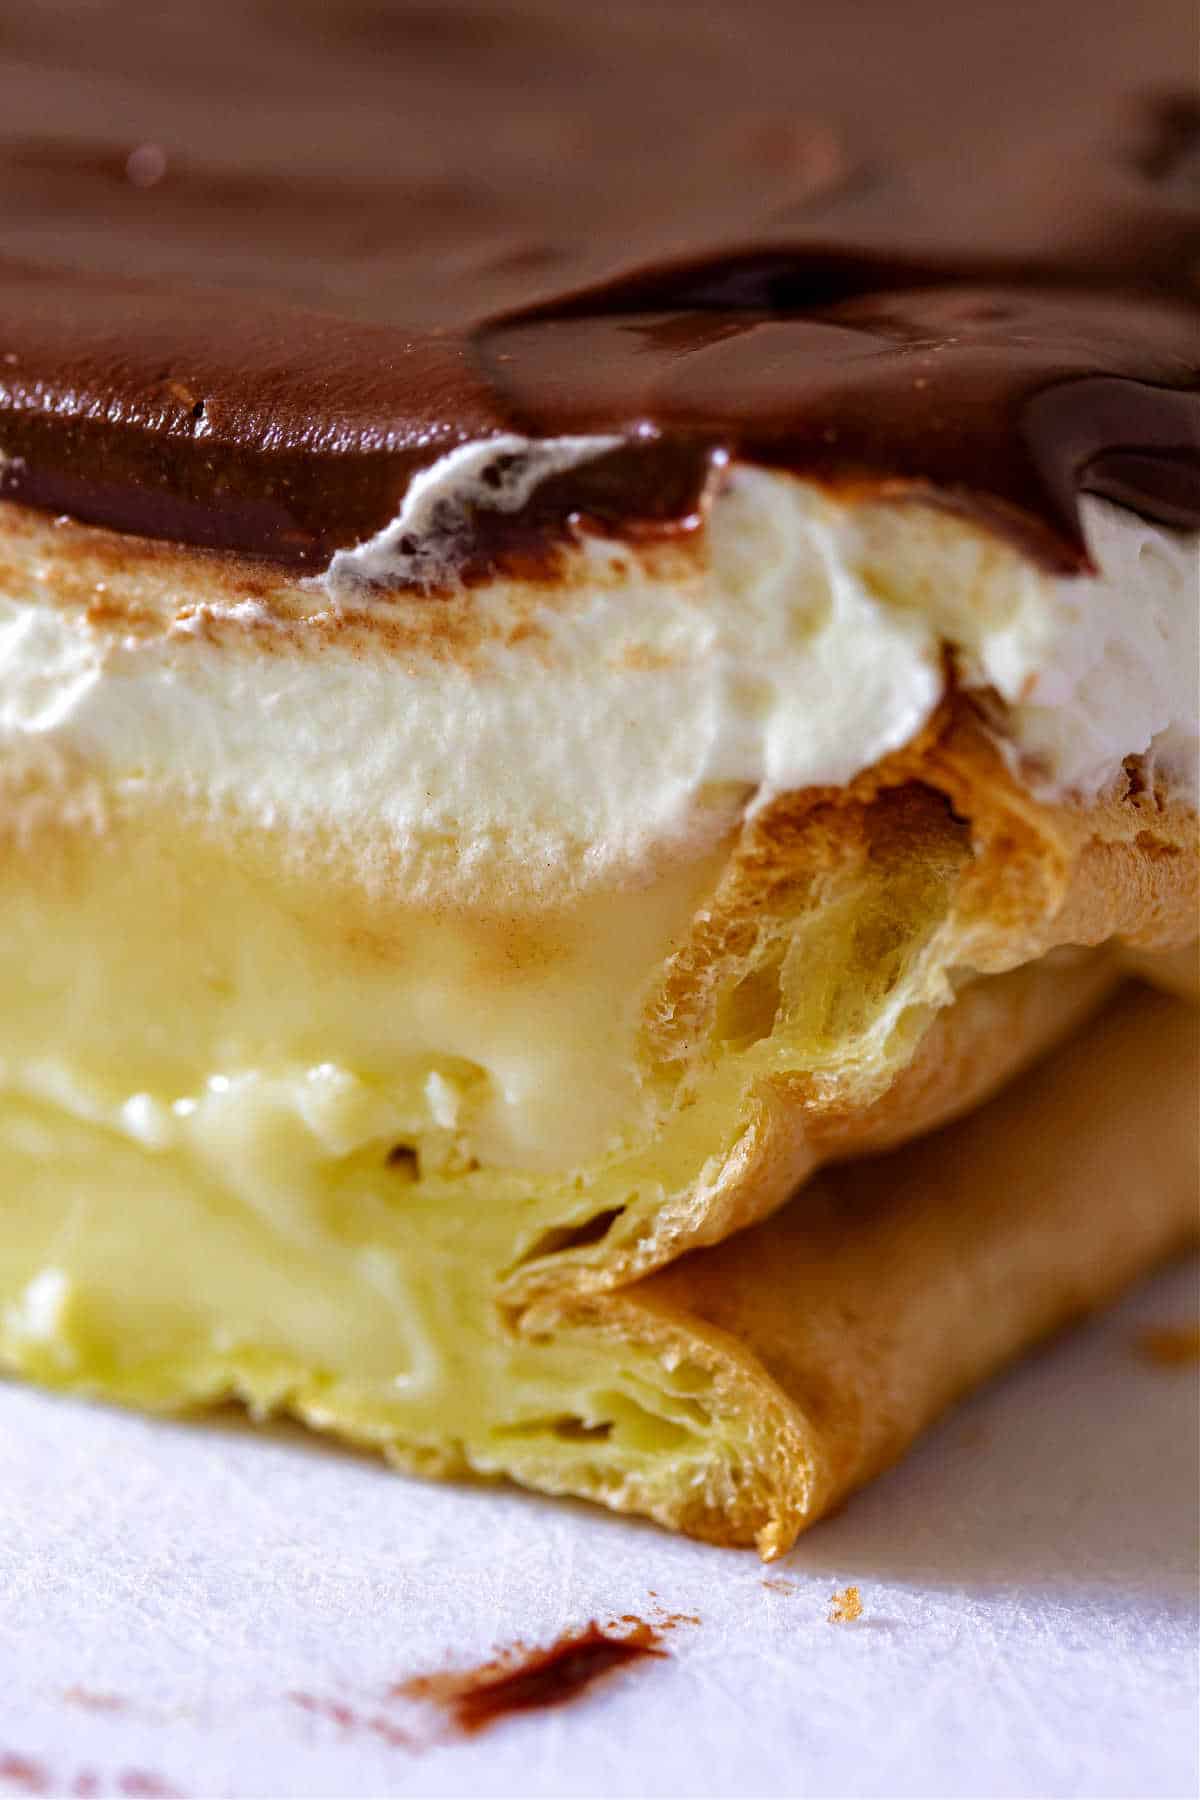 A close-up of a slice of cream puff cake showing the layers of choux paste, vanilla custard, whipped cream and chocolate ganache.